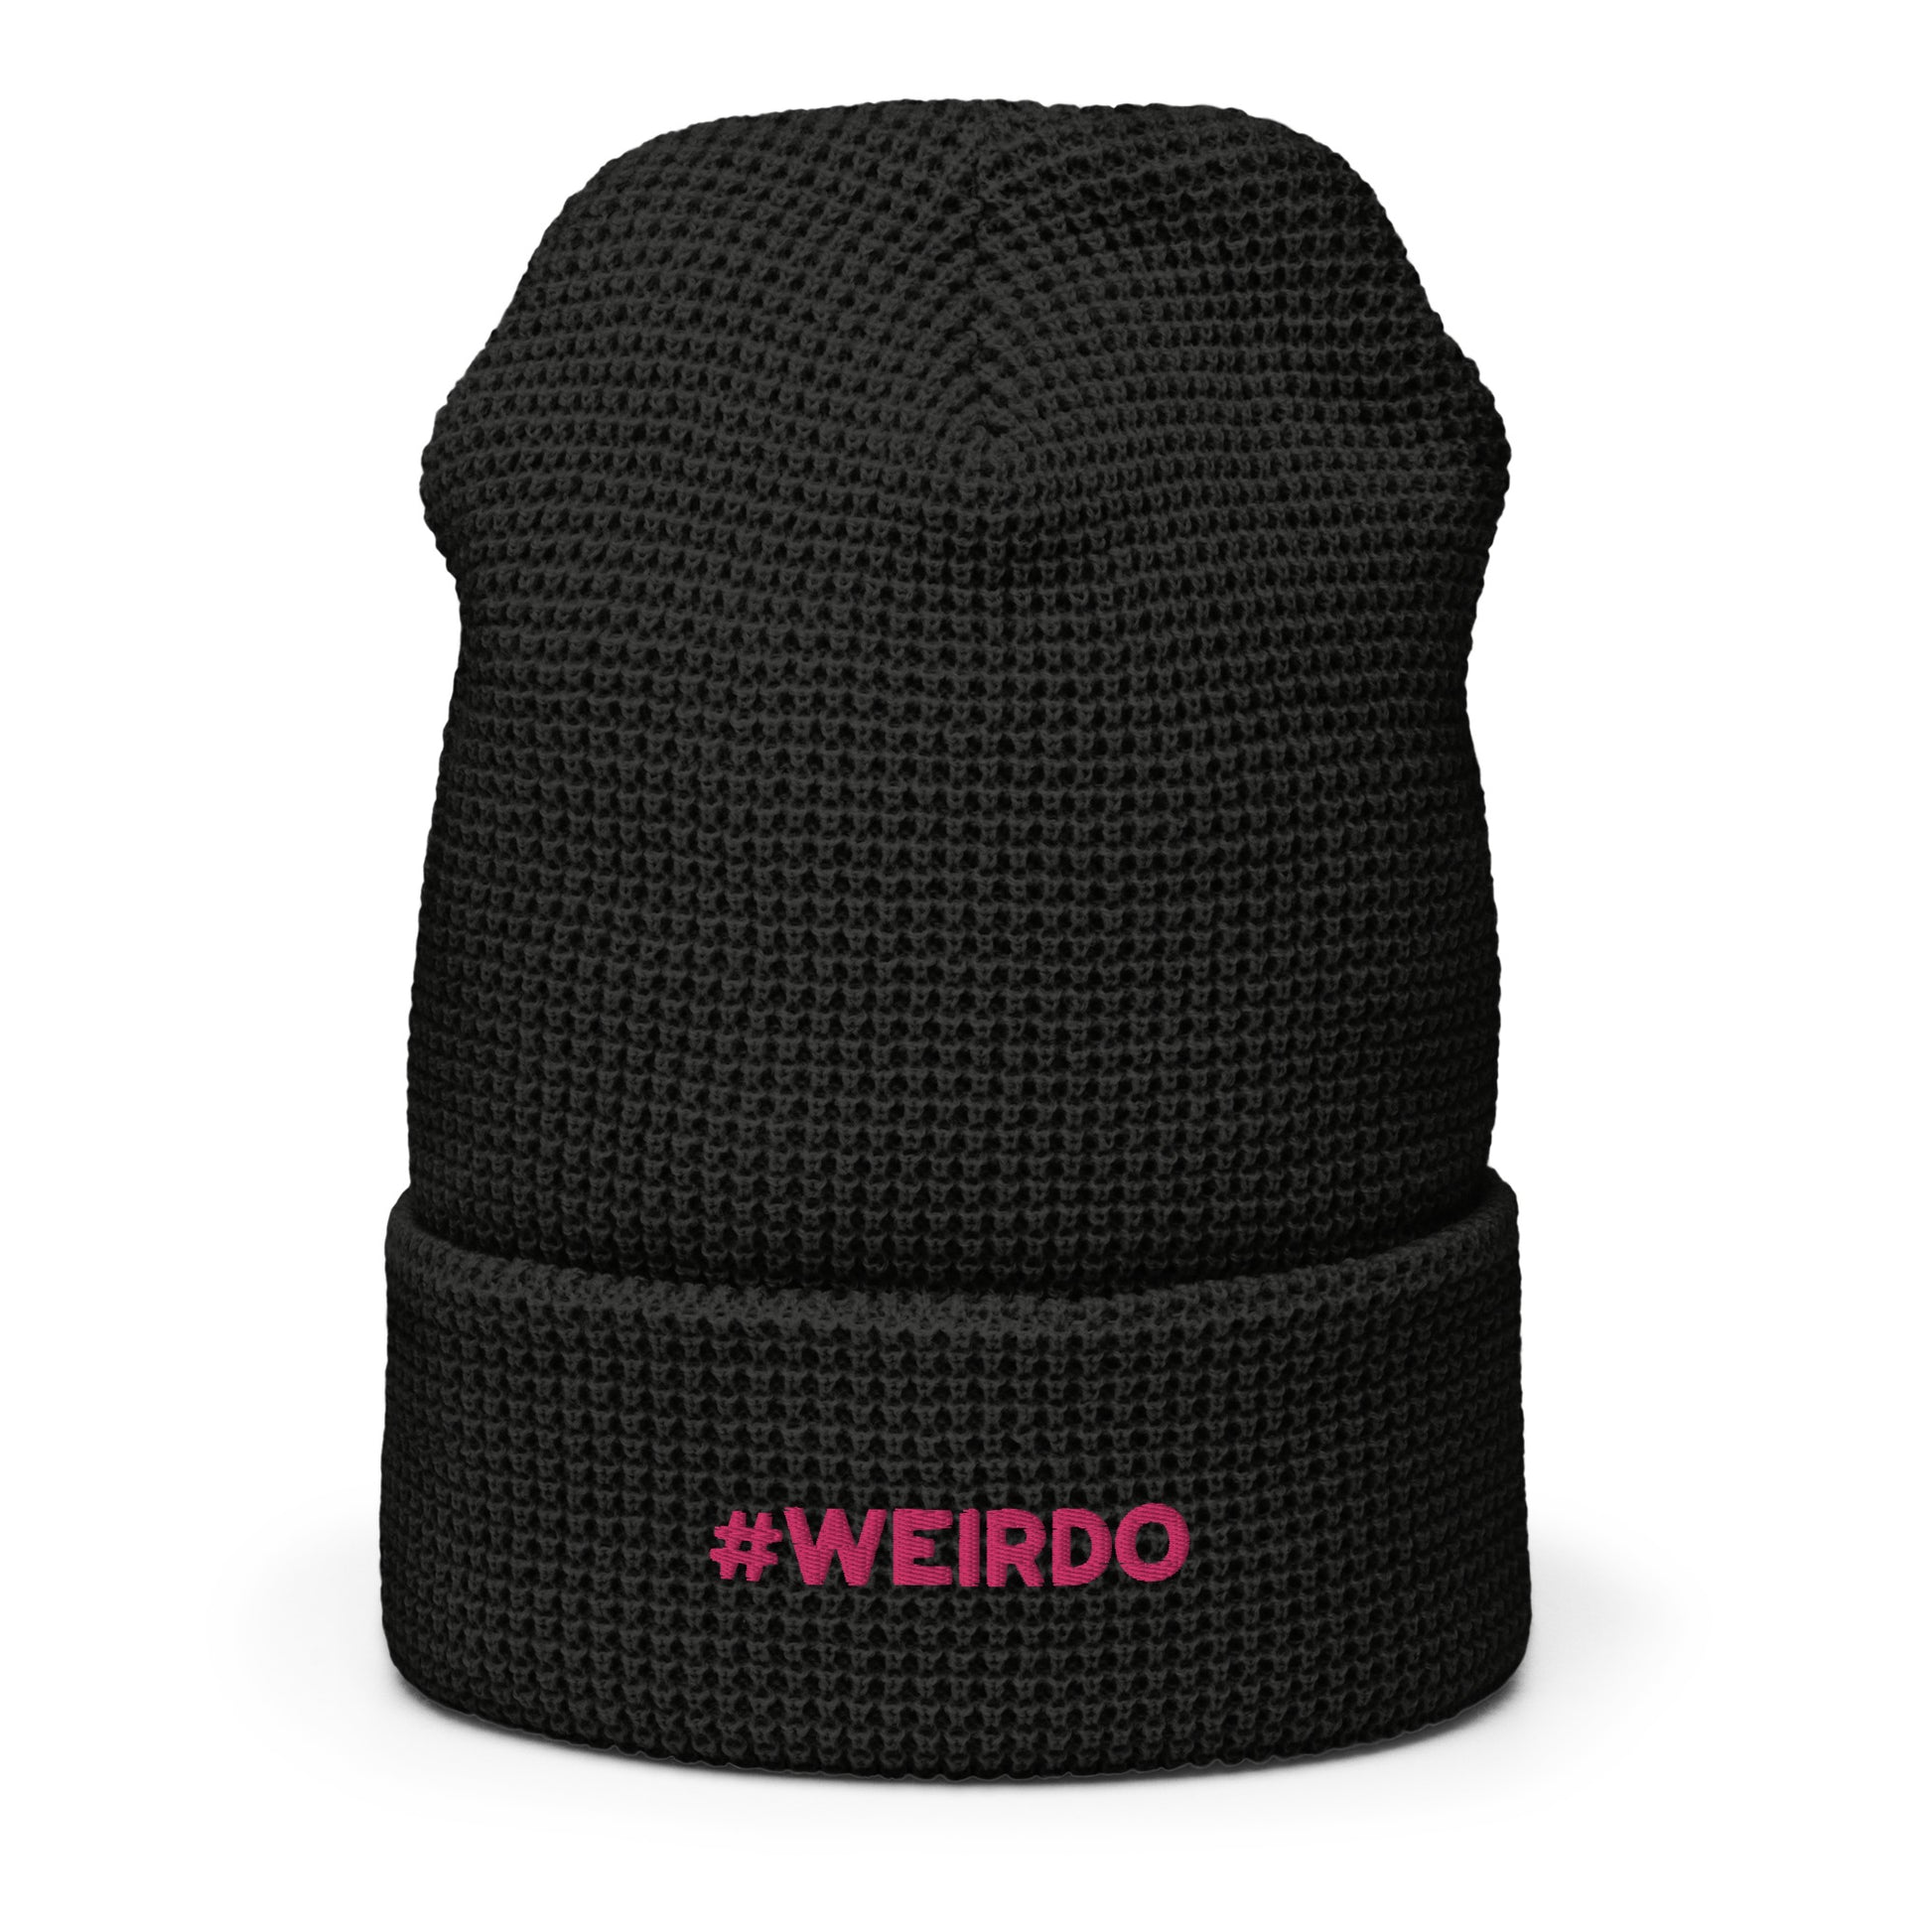 #WEIRDO | Waffle beanie hat with pink #WEIRDO embroidery at the front. This funny beanie is for weird men and weird women only!